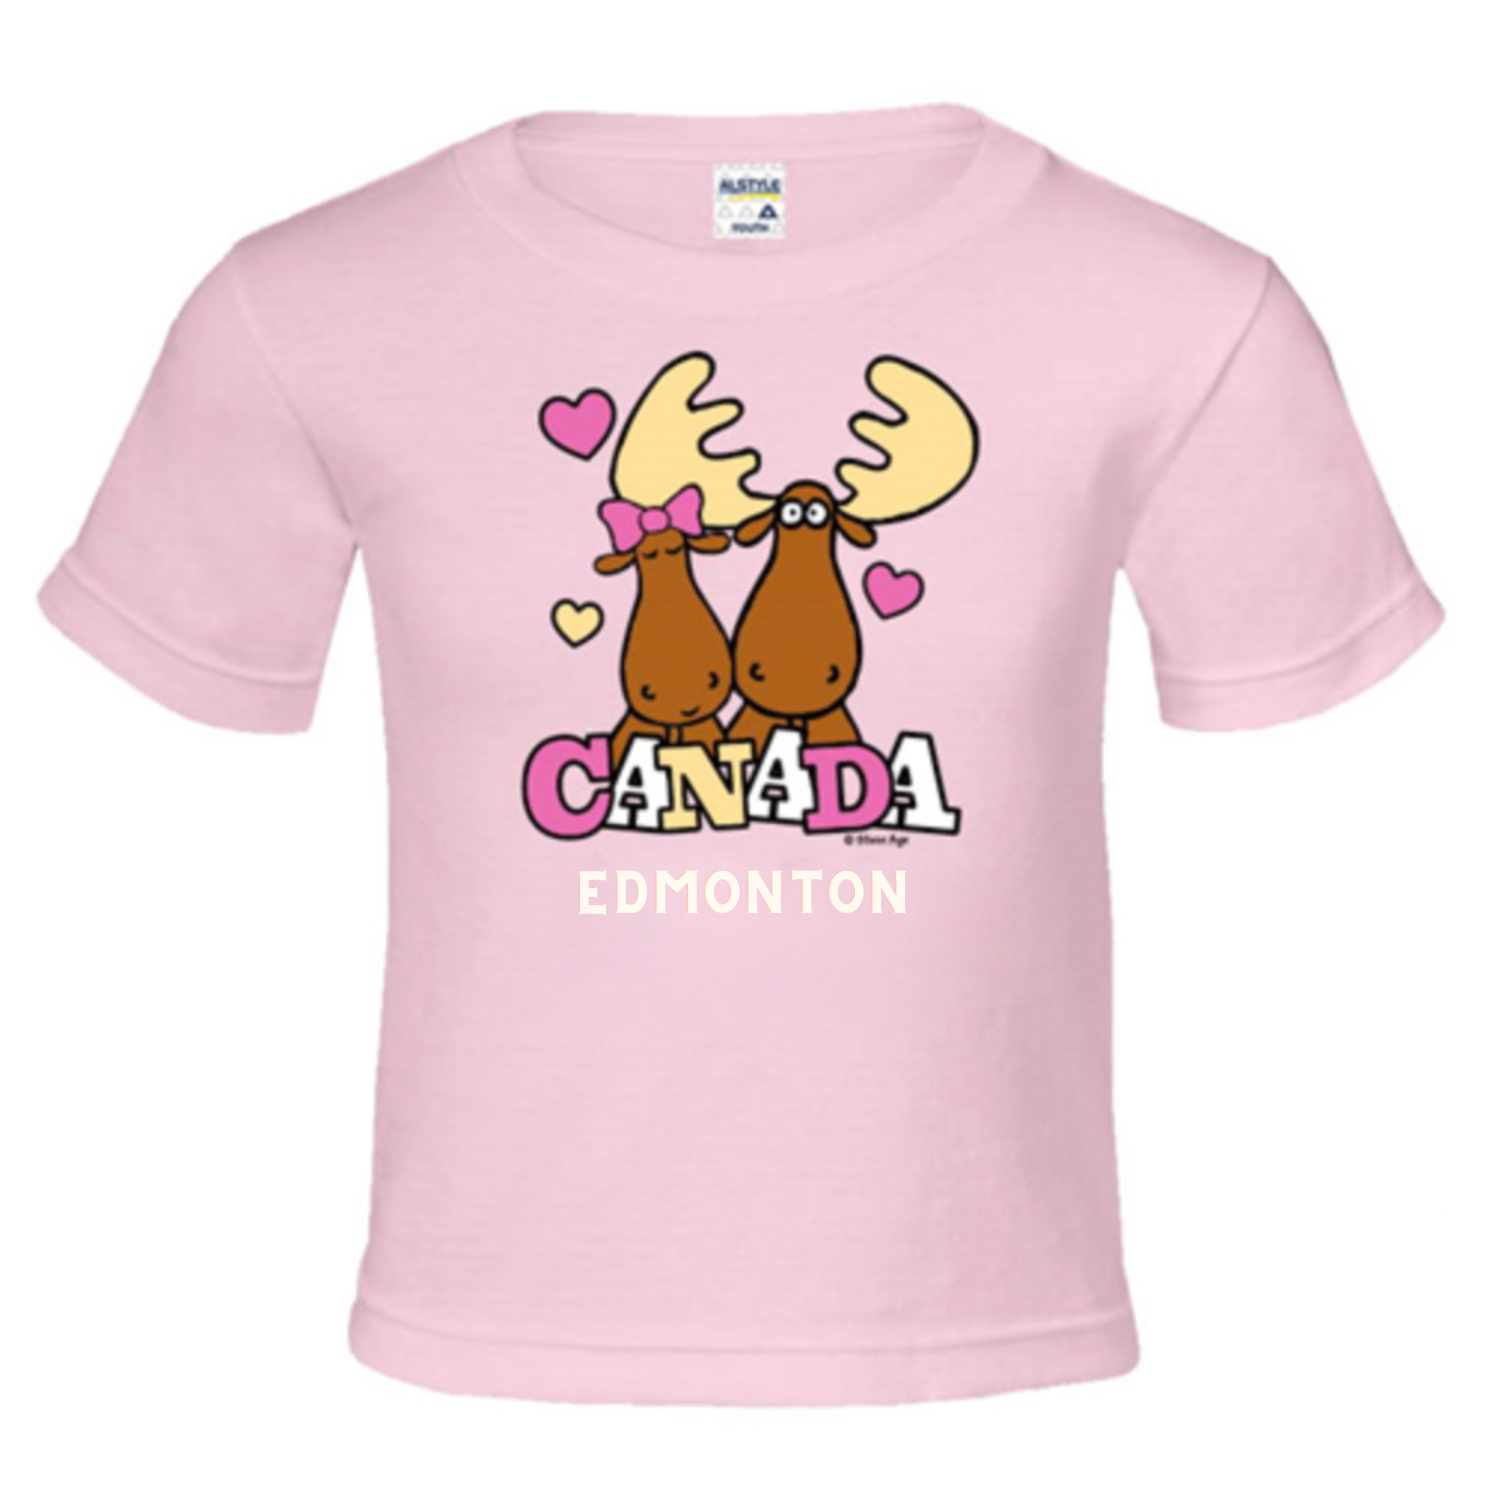 Adorable Edmonton T-Shirt for Kids in Lovely Pink with a Playful Moose Design